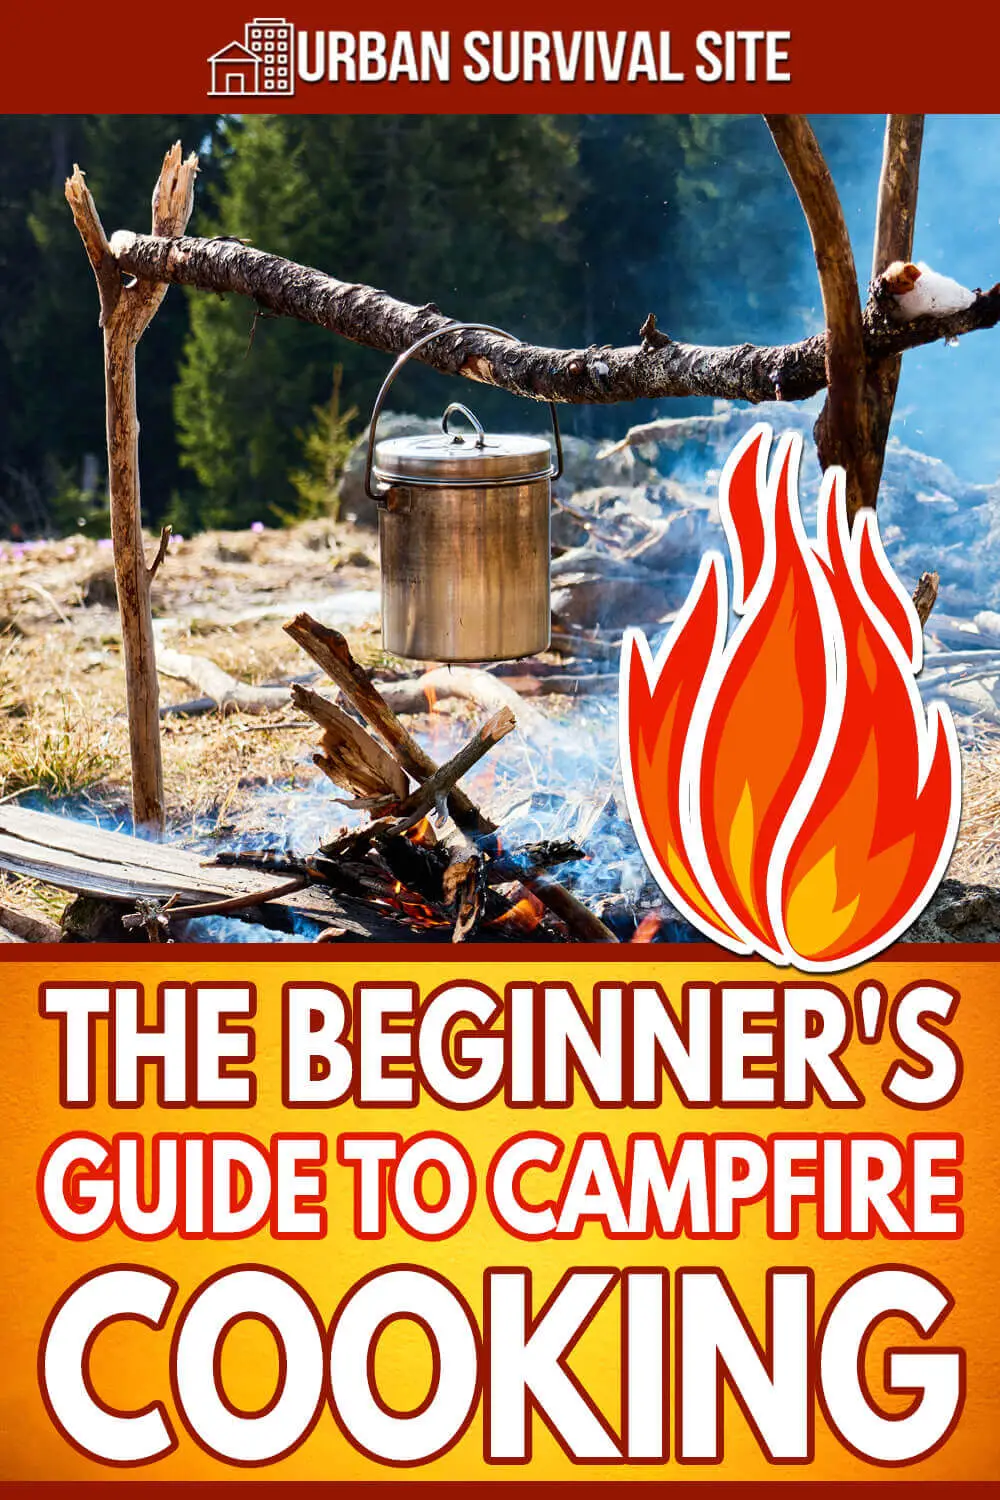 Camp Fires or Fire Pit Cooking Ngcb11